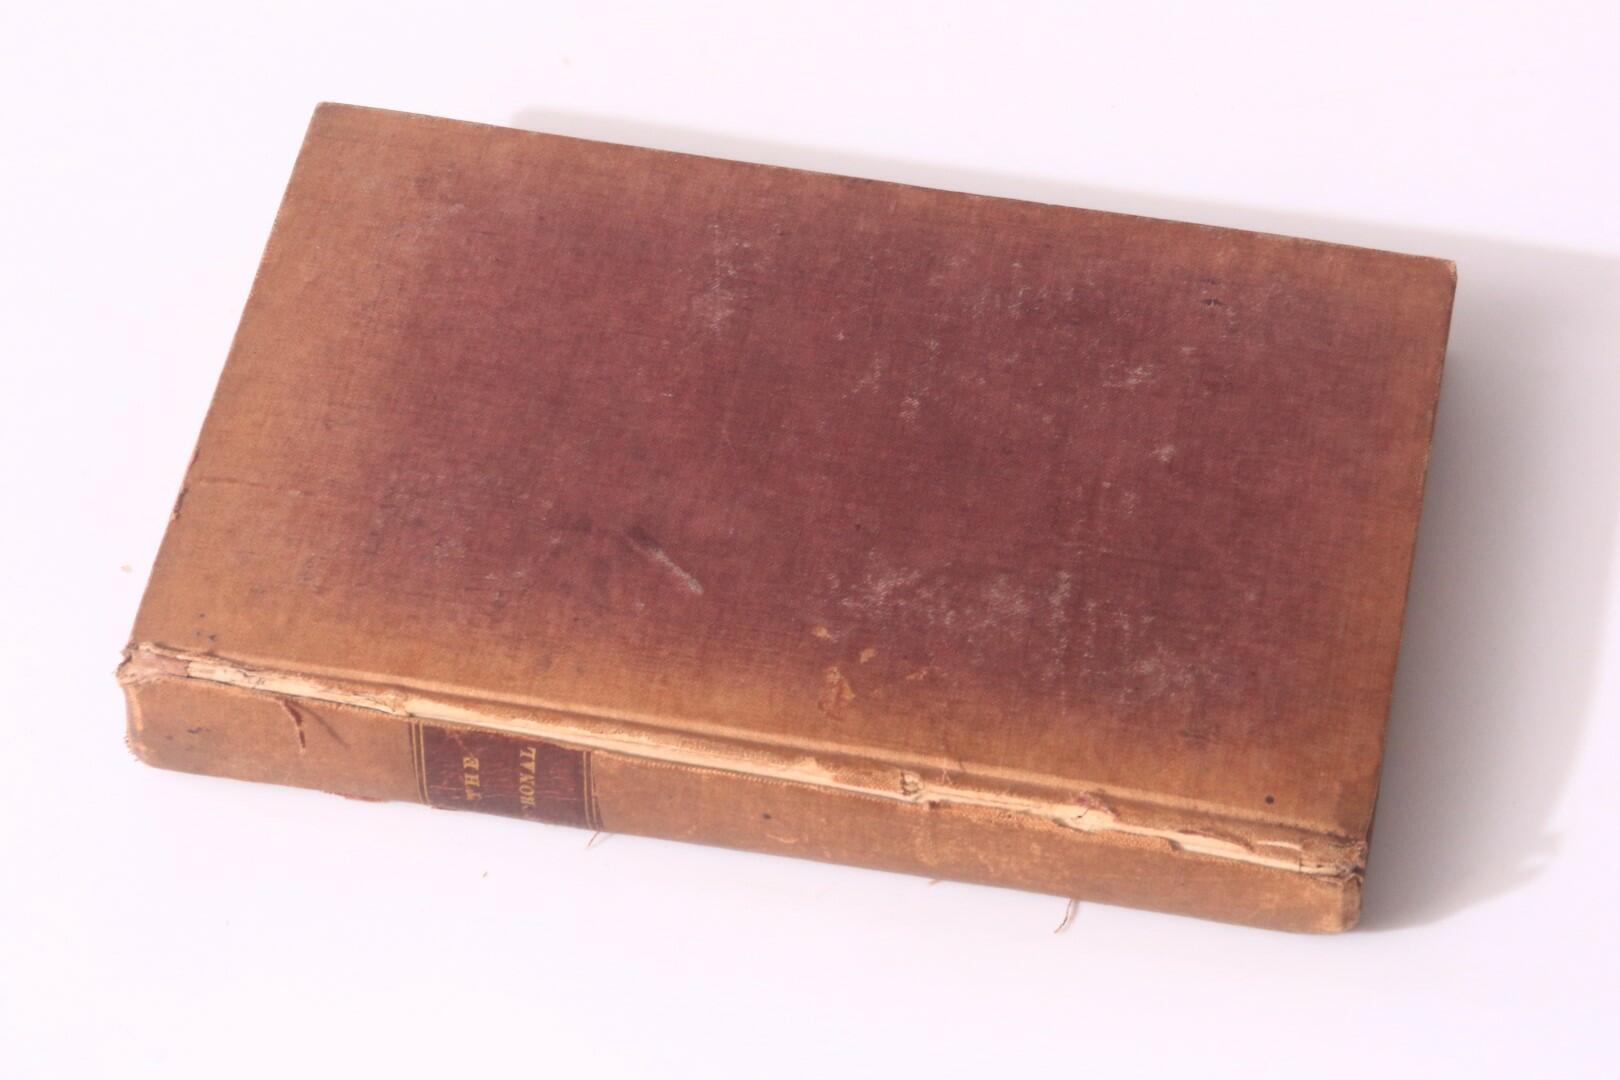 Mrs [Lydia Maria] Child - The Coronal - Carter and Hendee, 1832, First Edition.